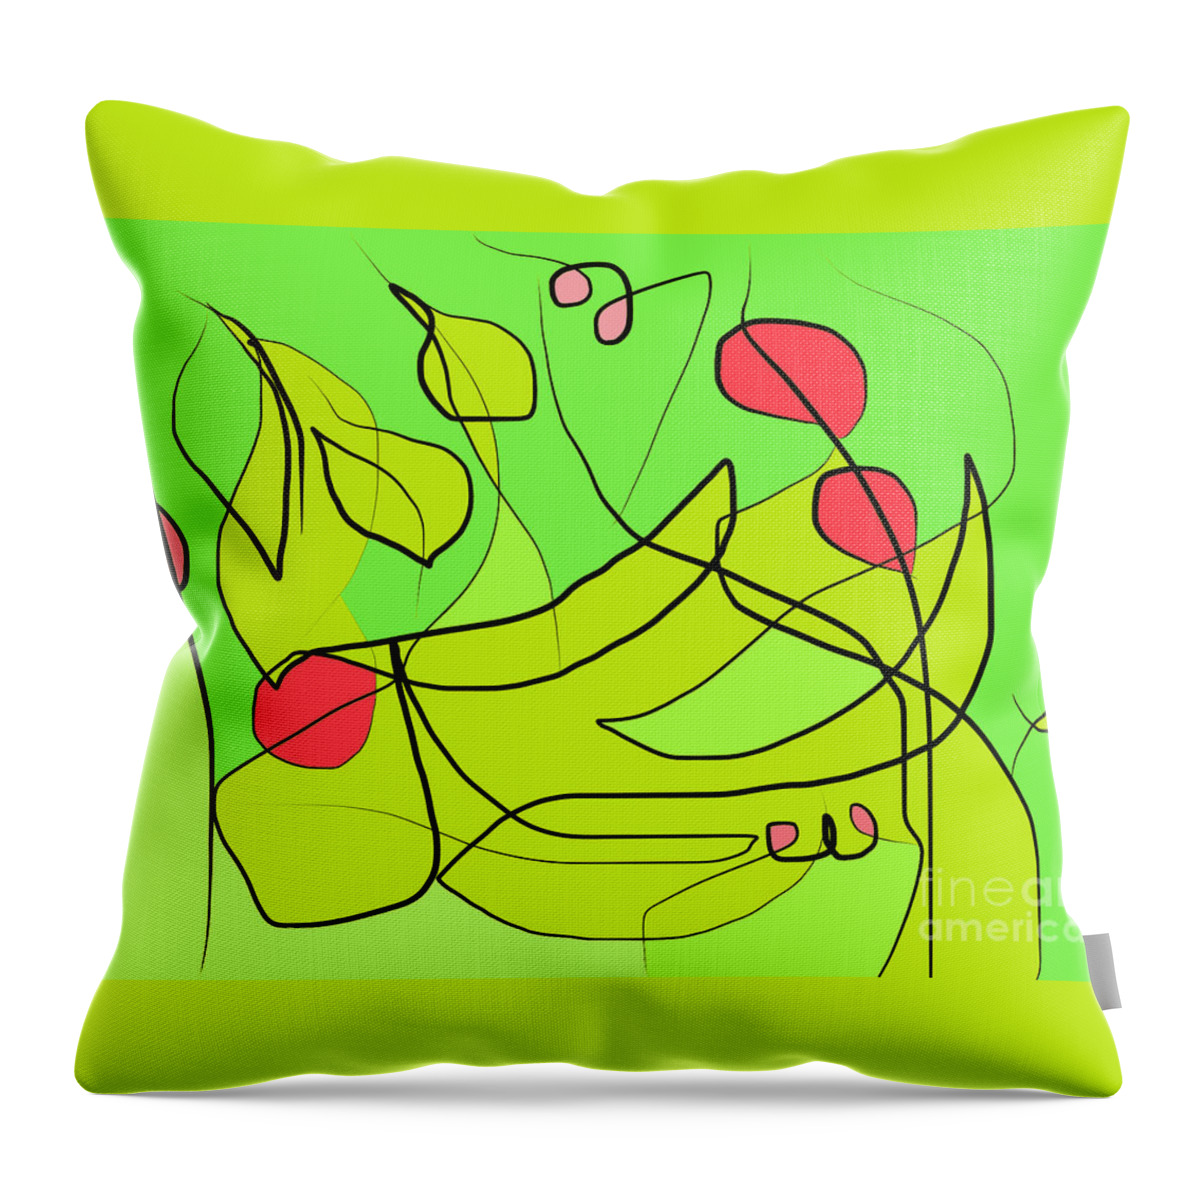 Abstract Throw Pillow featuring the photograph Winter Fruits #2 by Chani Demuijlder